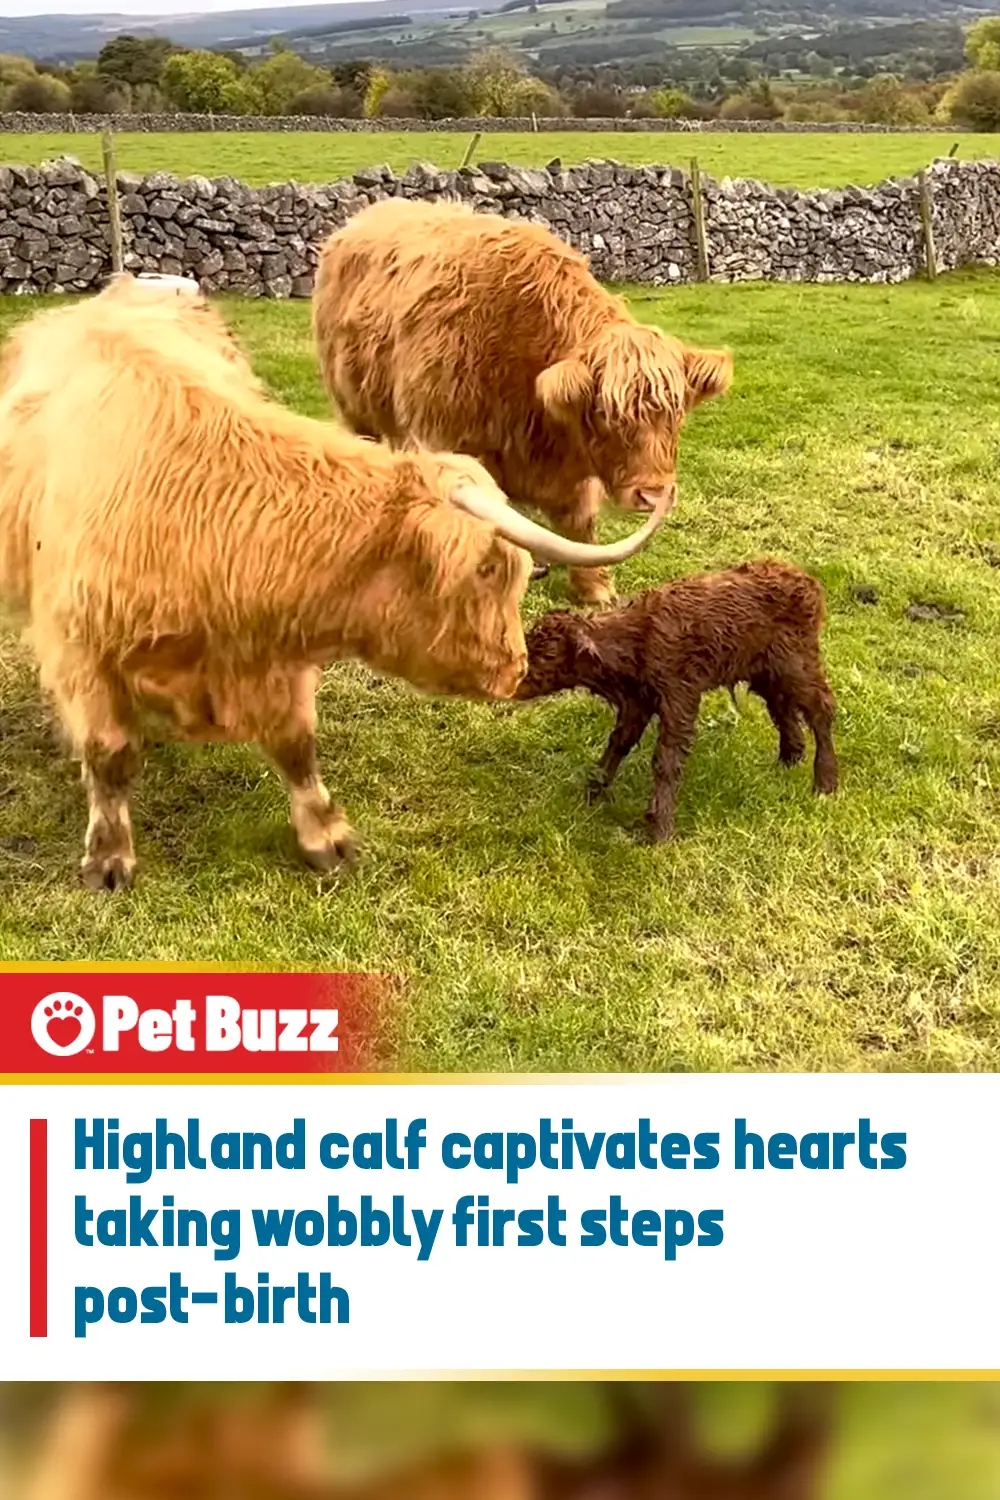 Highland calf captivates hearts taking wobbly first steps post-birth